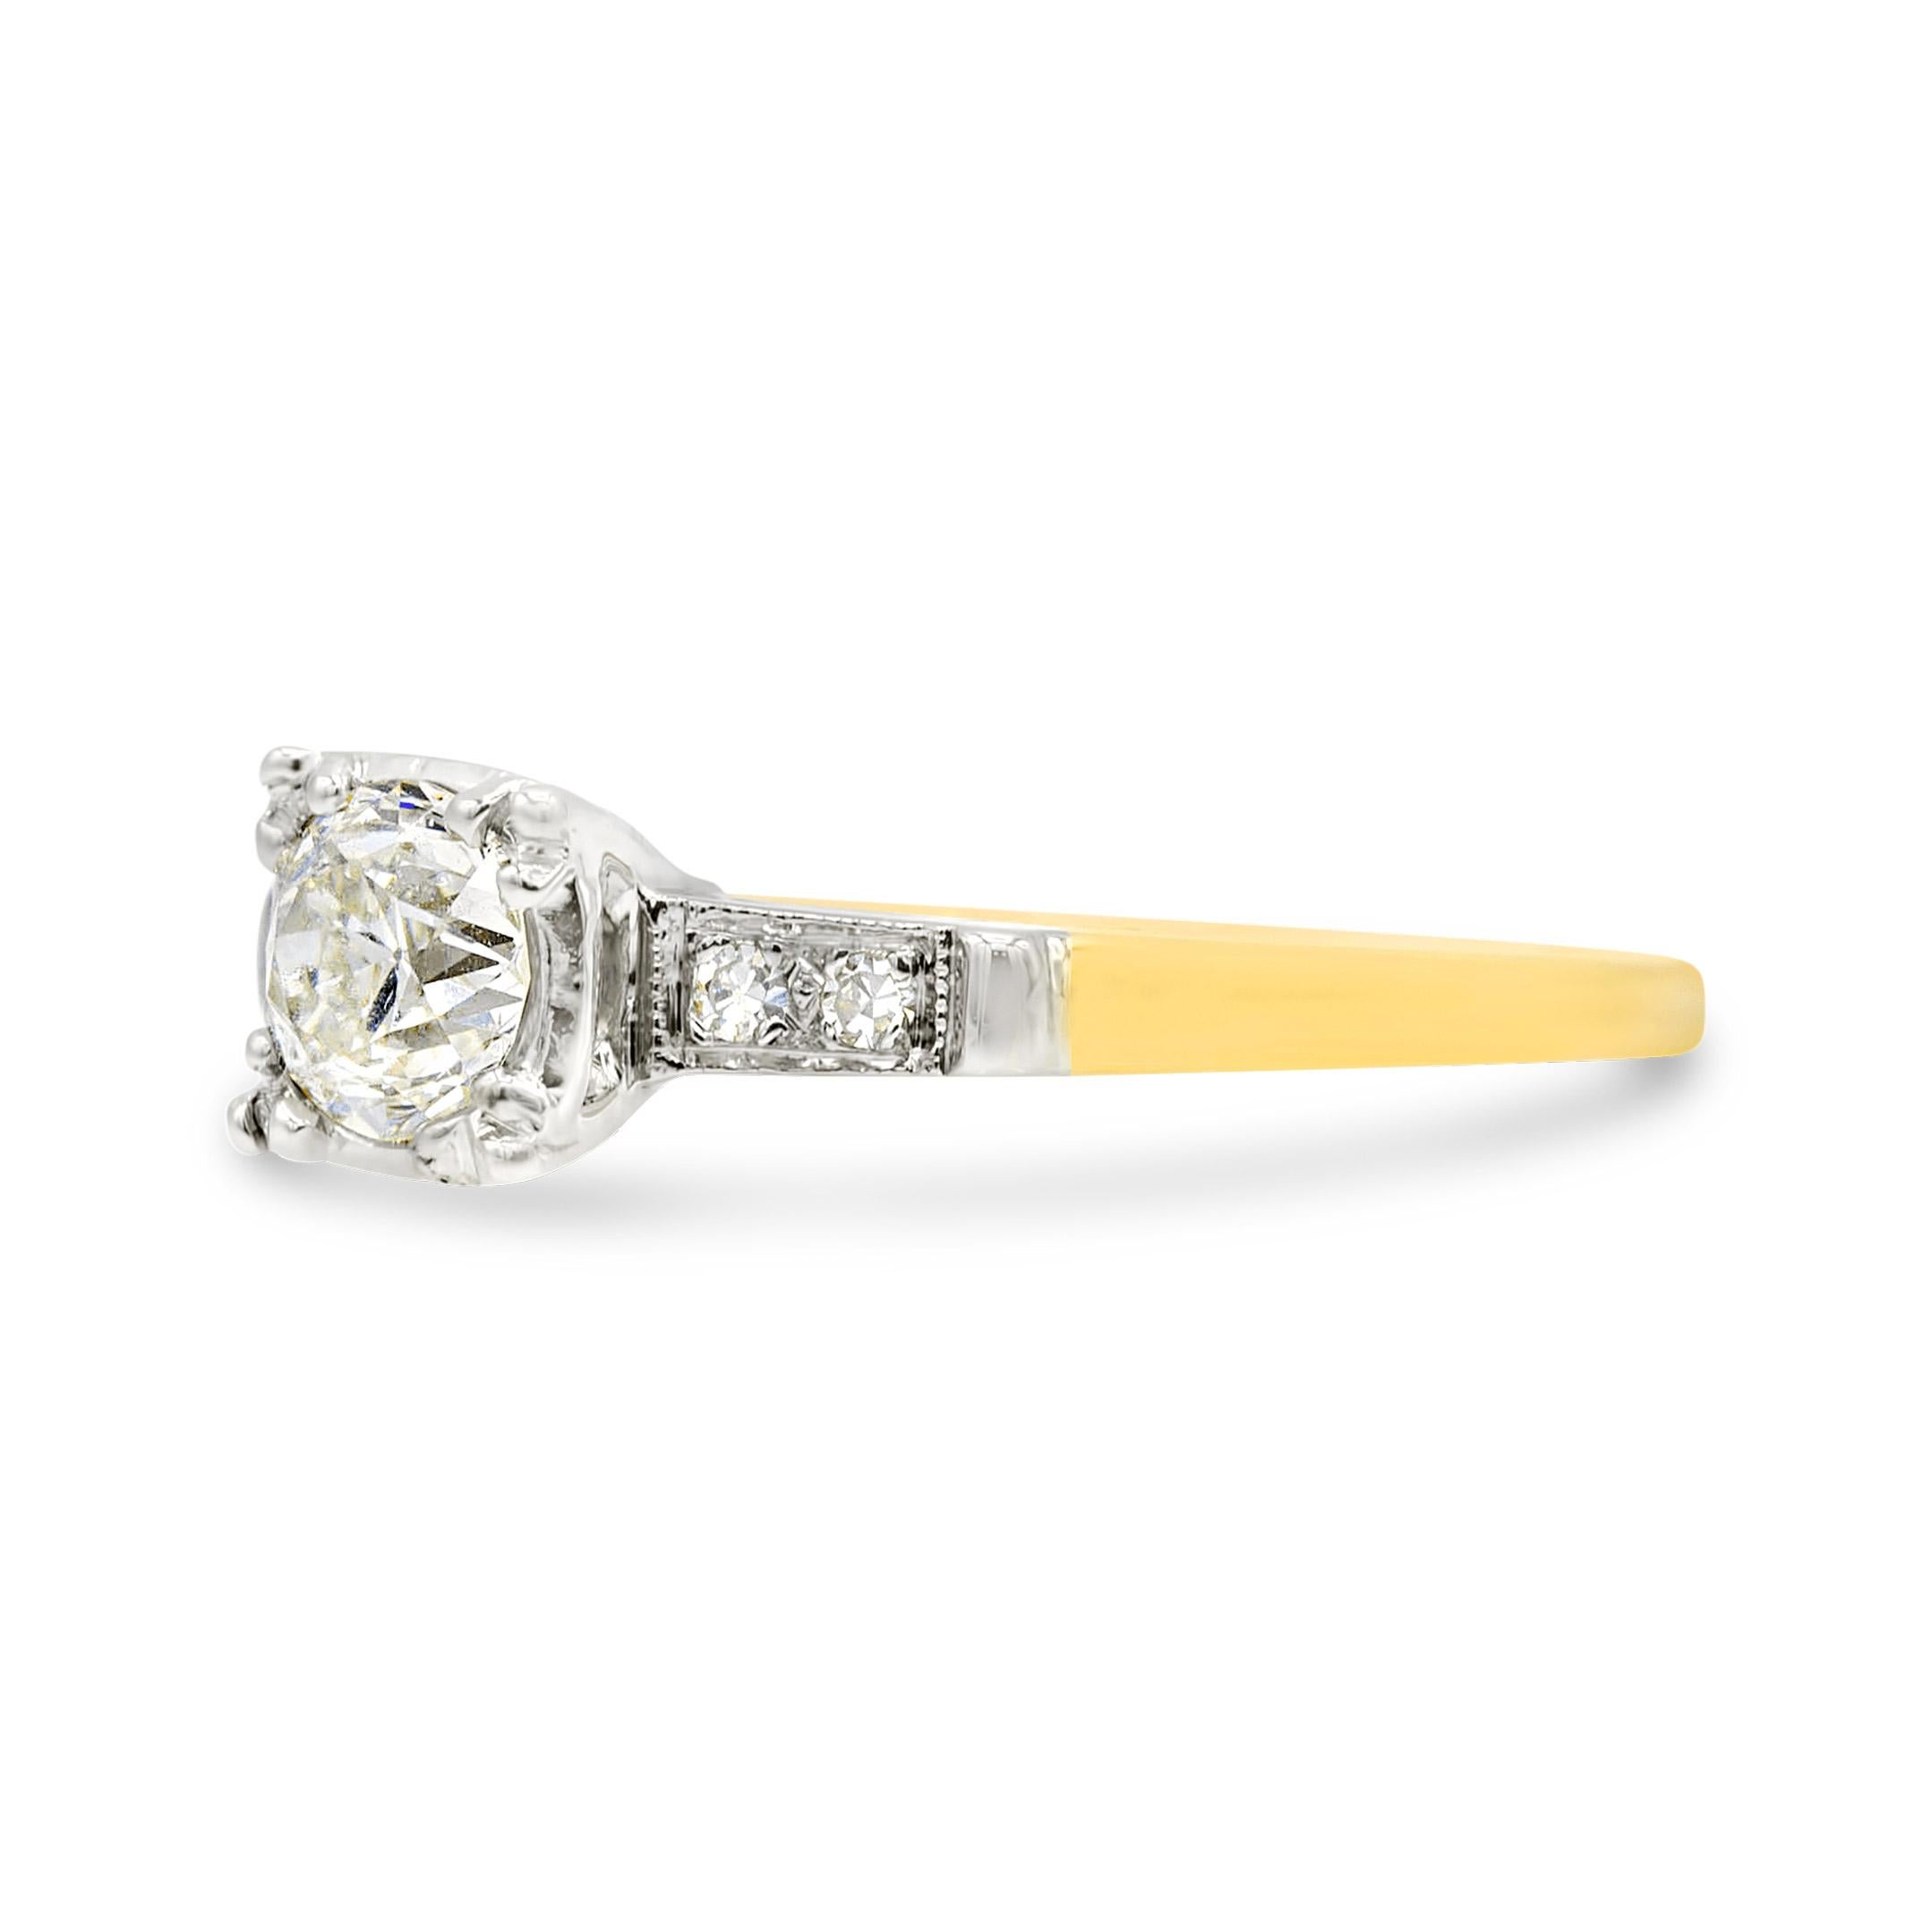 Just a sweet antique diamond in an amazing vintage two-tone setting. The center old Euro weighs in at just a hair over half a carat and has those classic antique proportions we so love in this cut. This ring is a great under one carat engagement